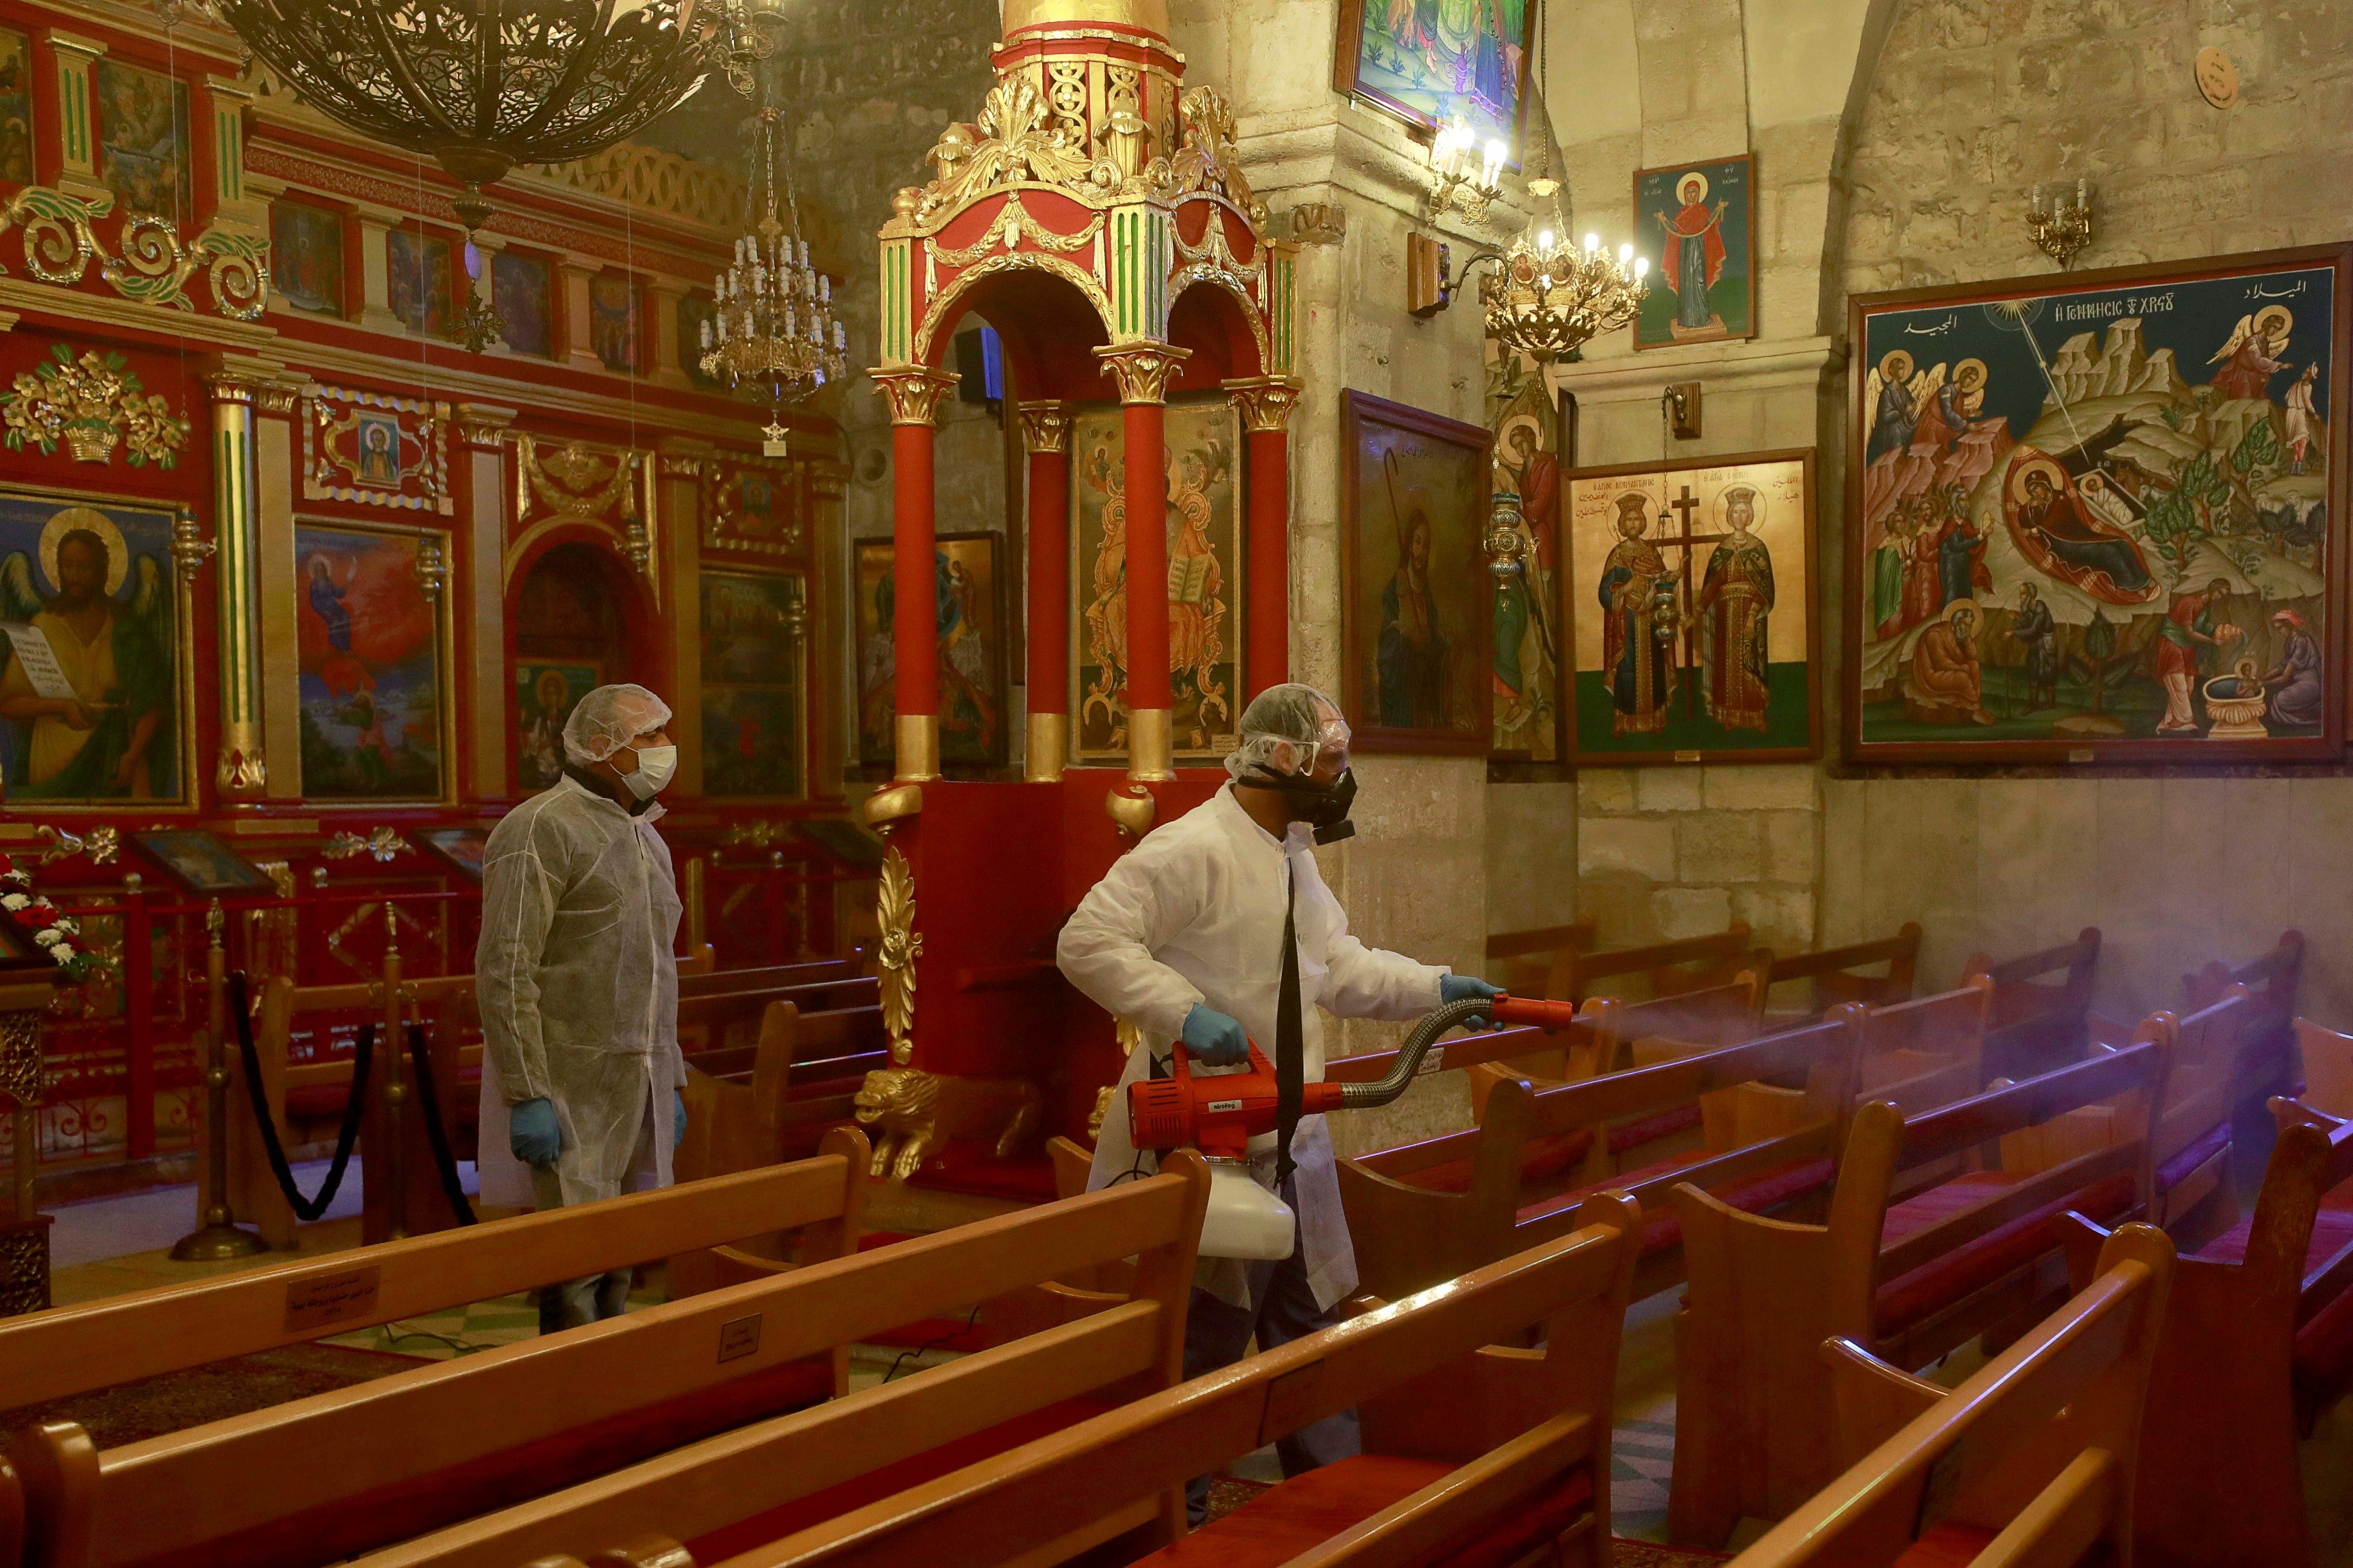 Palestinian workers disinfect a church as a preventive measure against the coronavirus, in Ramallah in the in the Israeli-occupied West Bank. (Credit: Reuters)